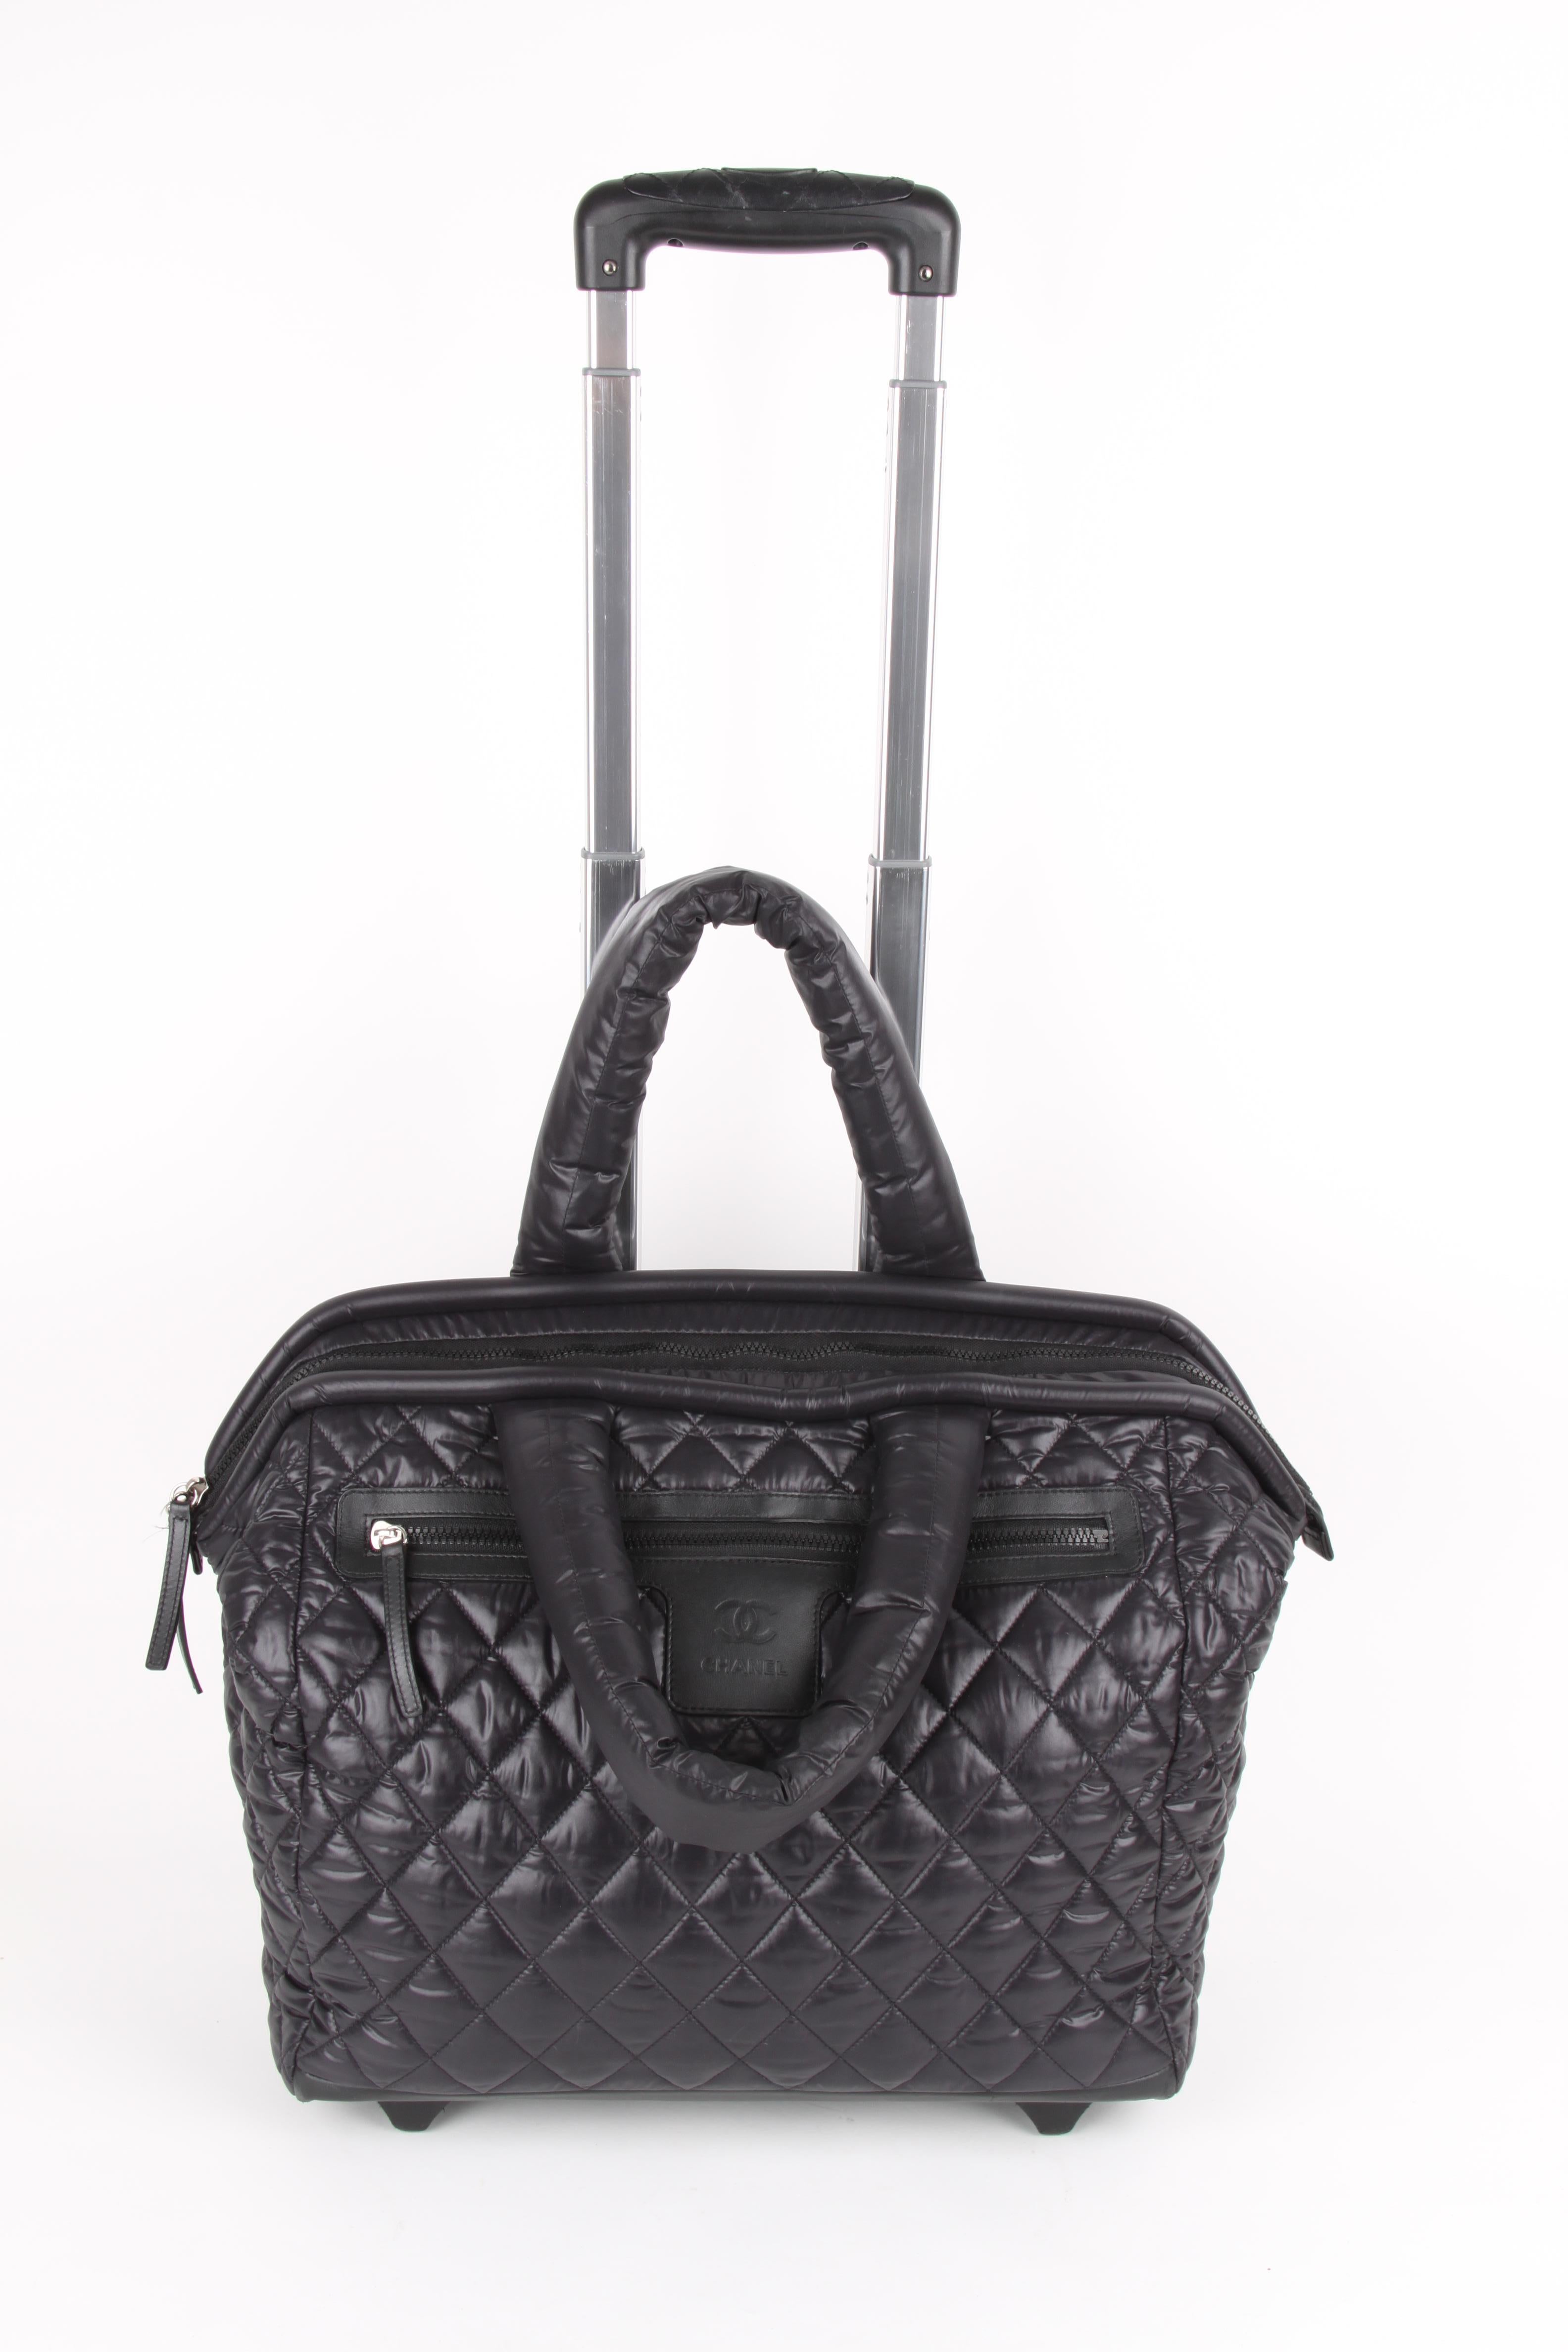 The Chanel Black Quilted Nylon Coco Cocoon Trolley Rolling Case is a highly sought after piece from Lagerfeld's fun and chic Coco Cocoon line.

Leather trim zipper details feature the Chanel logo and the easy-to-open plastic zipper opens to reveal a